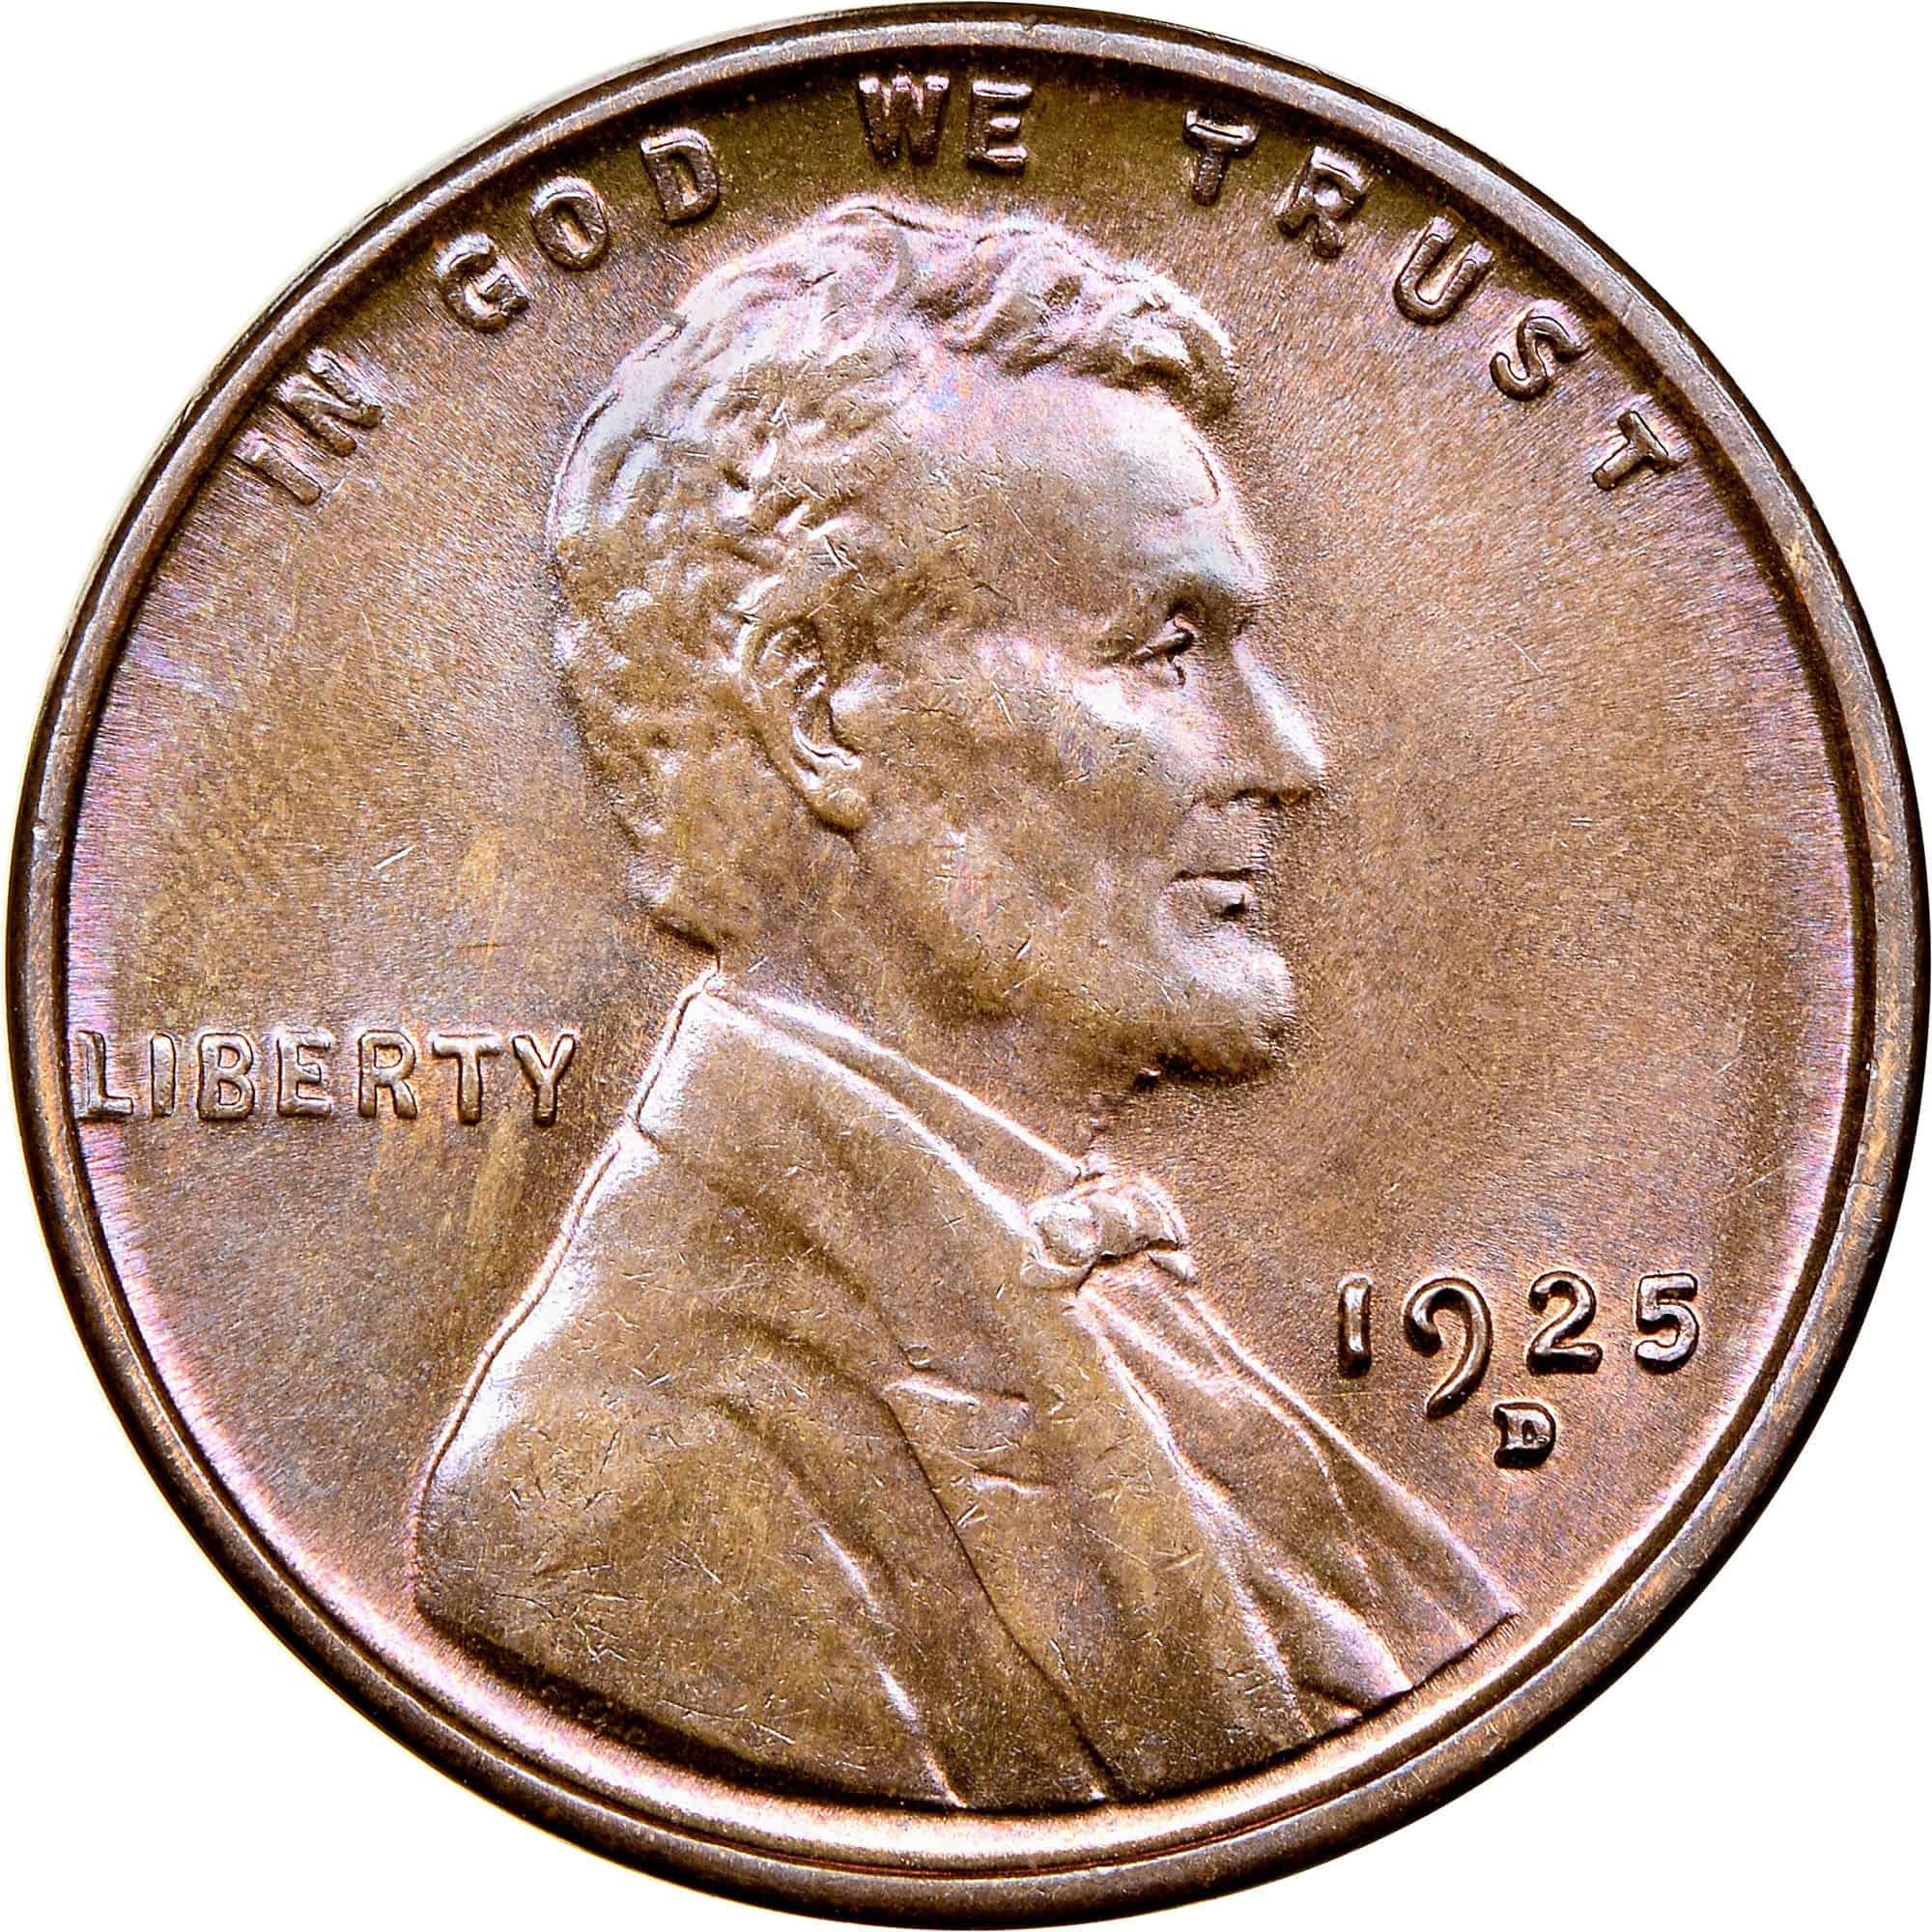 The obverse of the 1925 penny